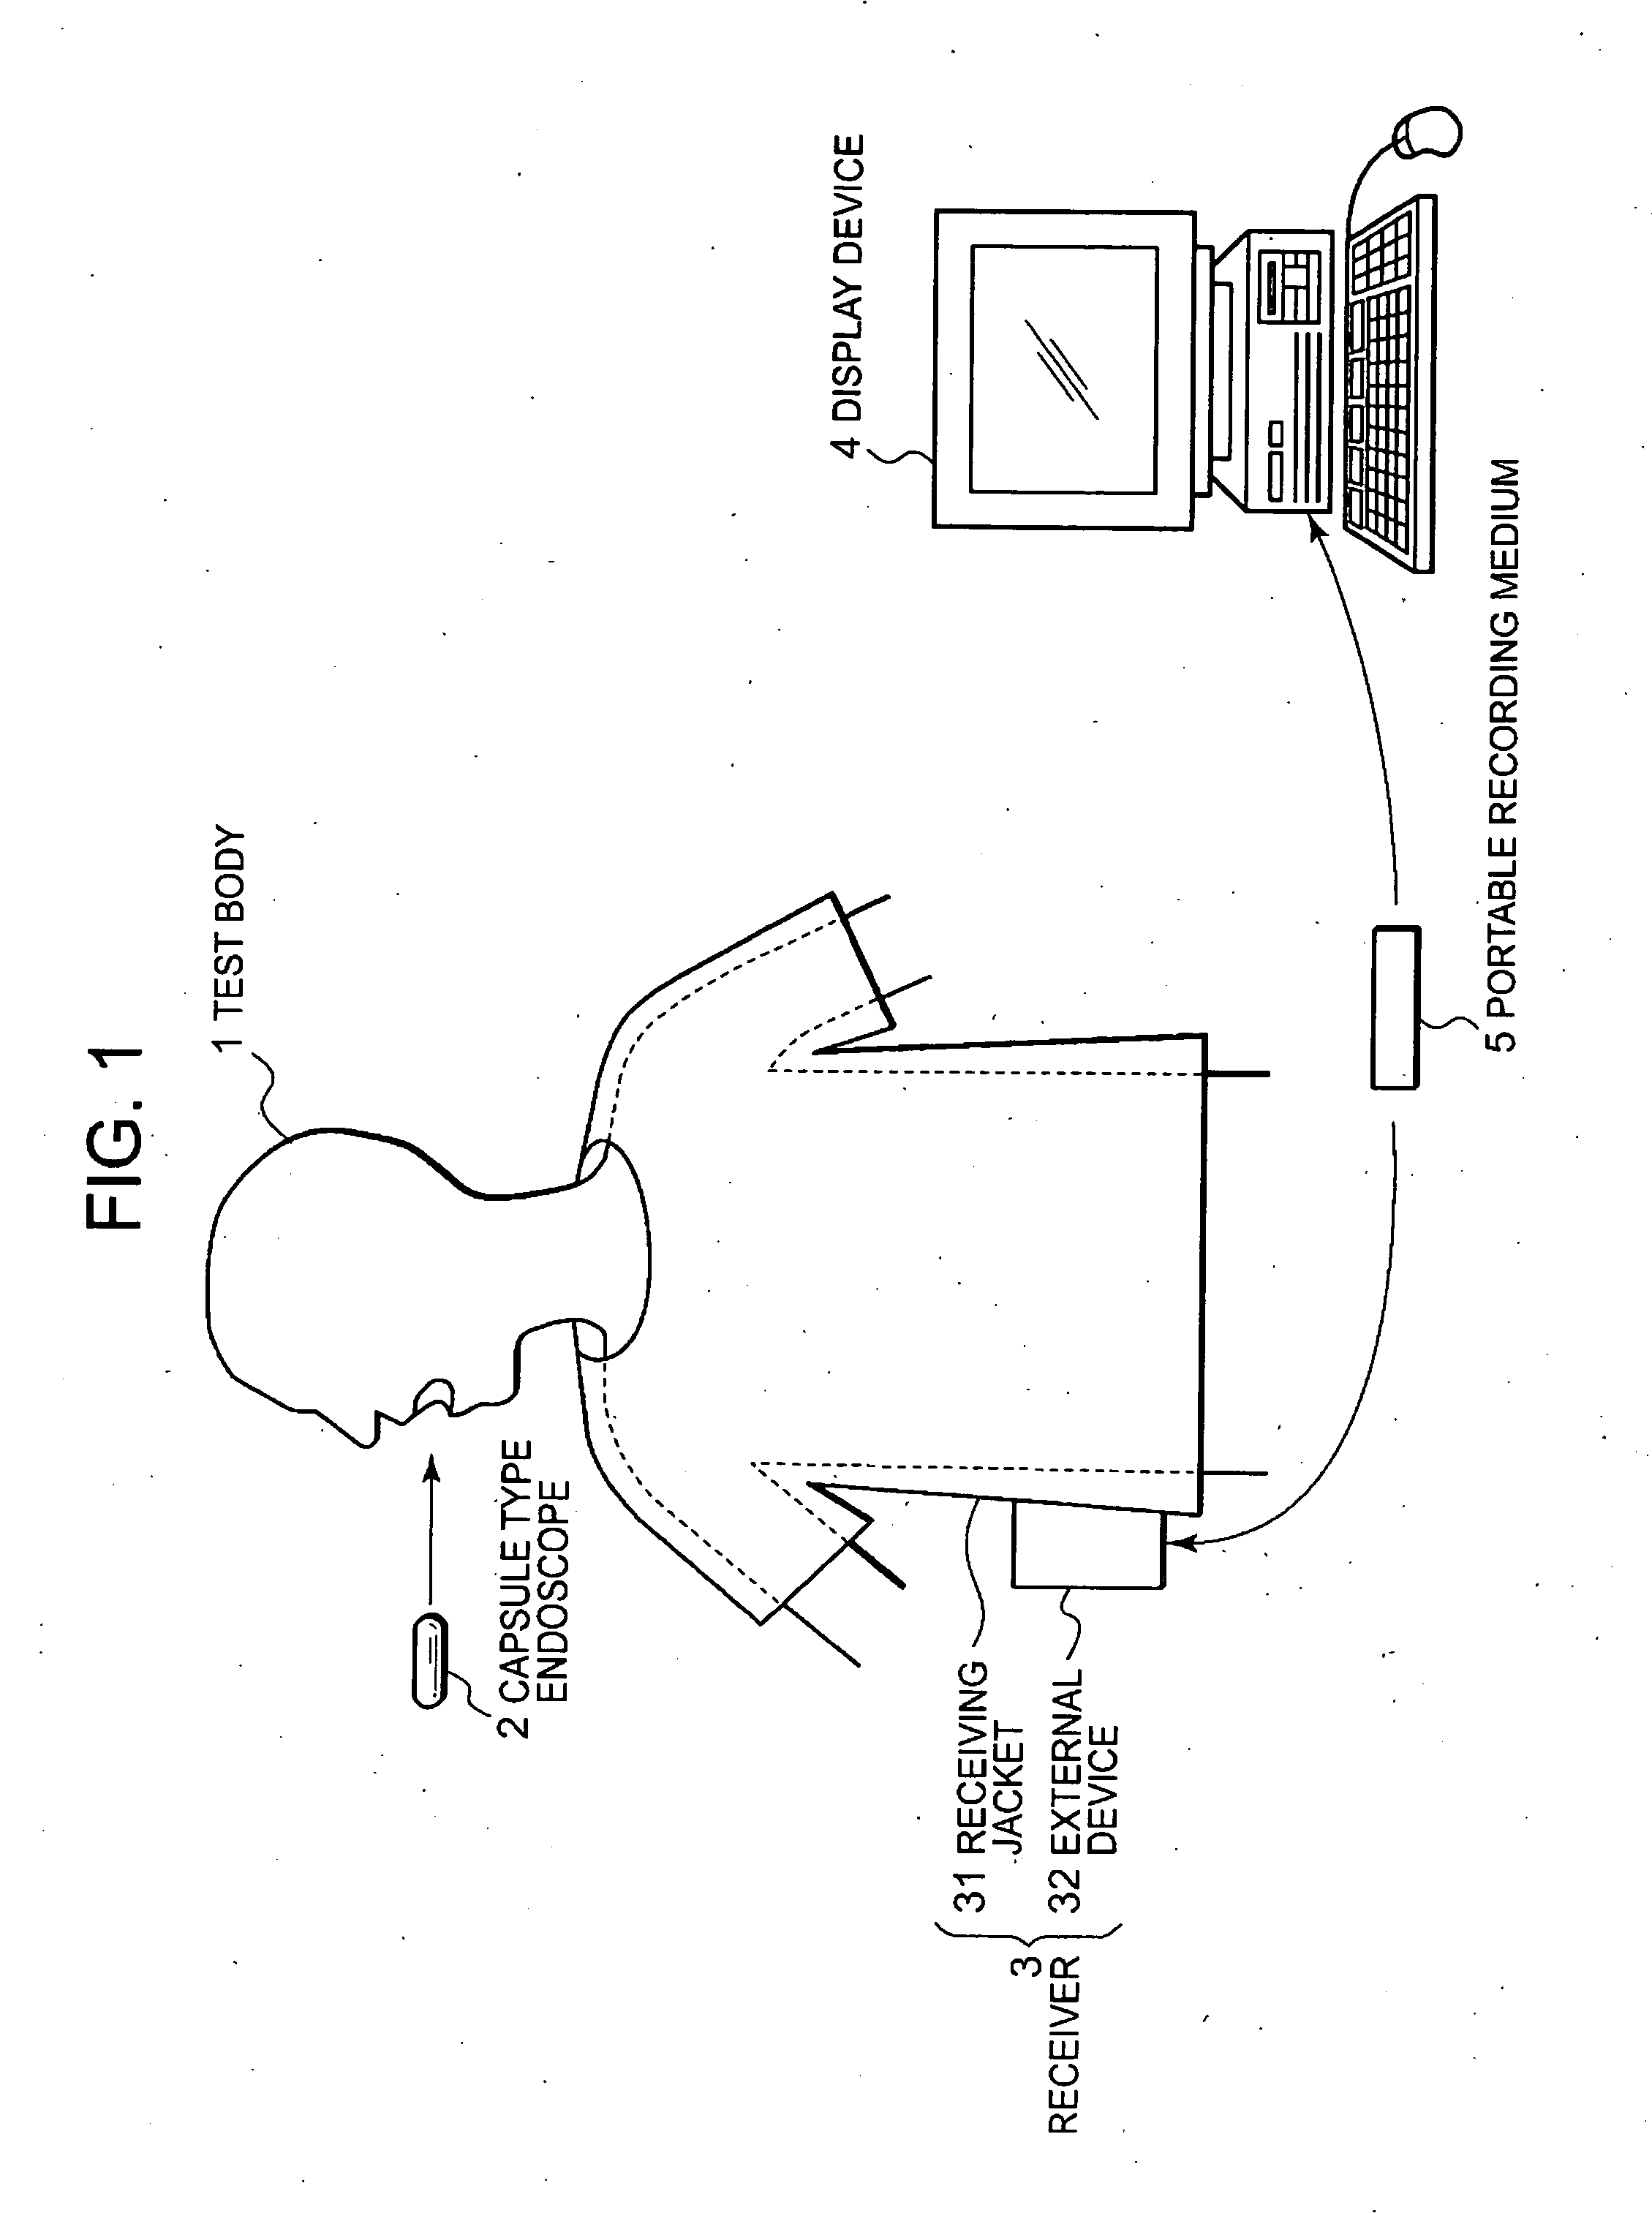 Intrabody introduced device and medical device